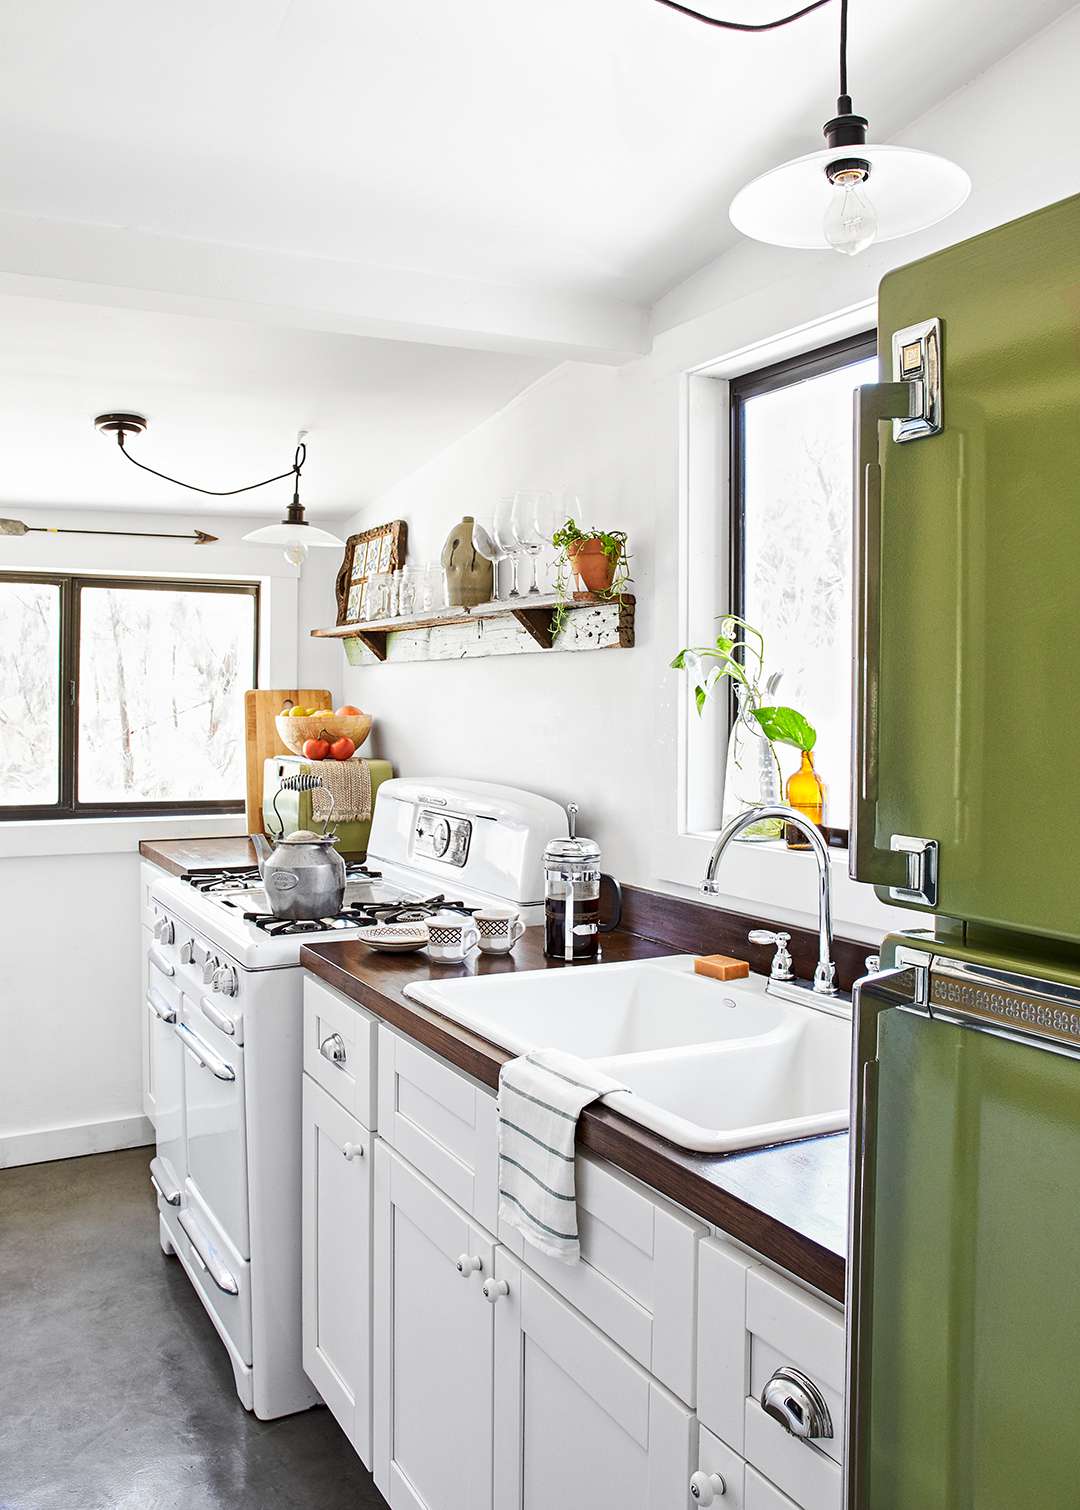 Find the Perfect Kitchen Color Scheme | Better Homes & Gardens